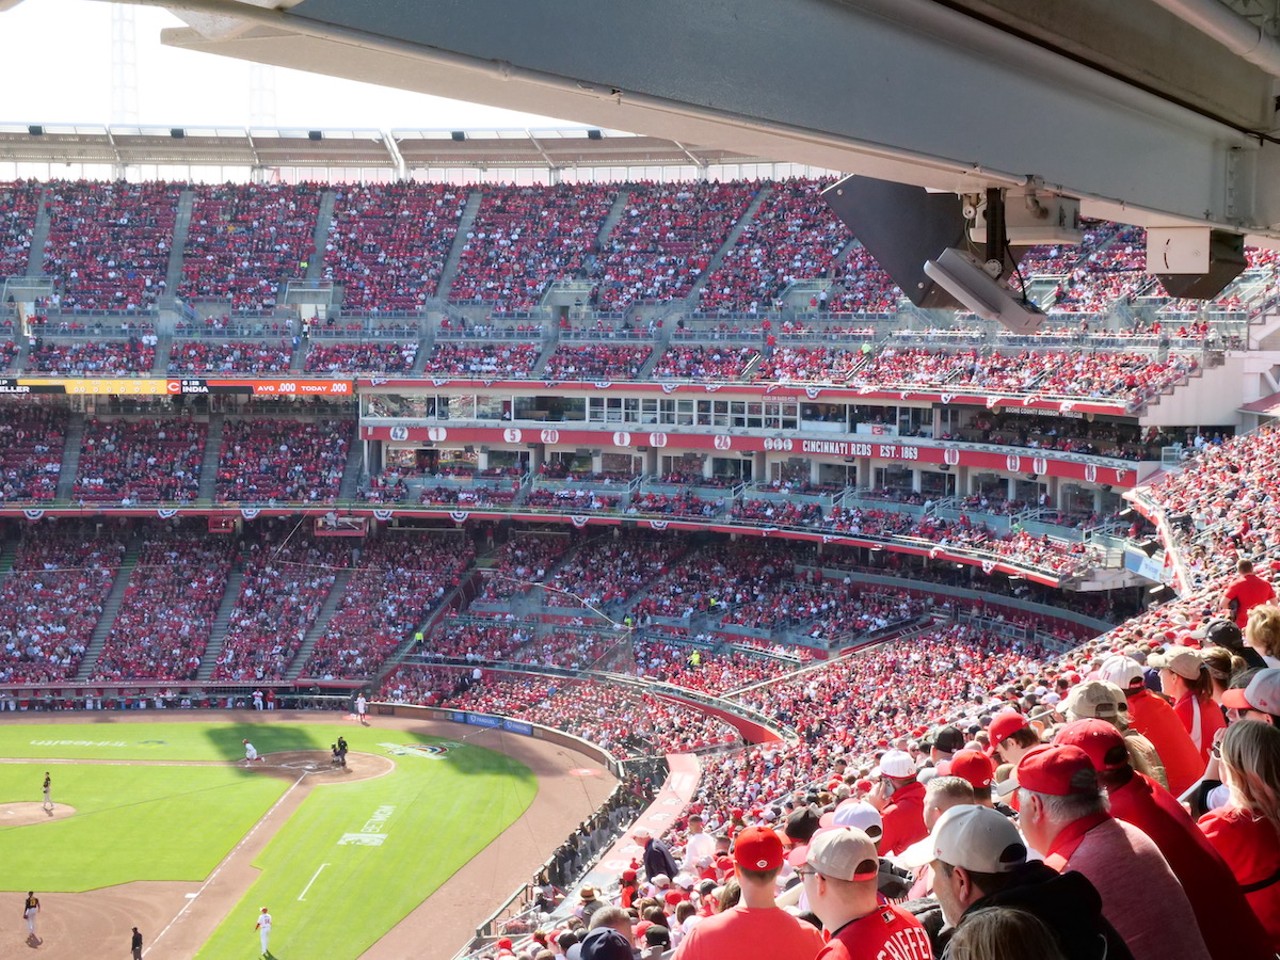 The crowd at Great American Ball Park watches the Cincinnati Reds vs. the Pittsburgh Pirates during the season opener on March 30, 2023.